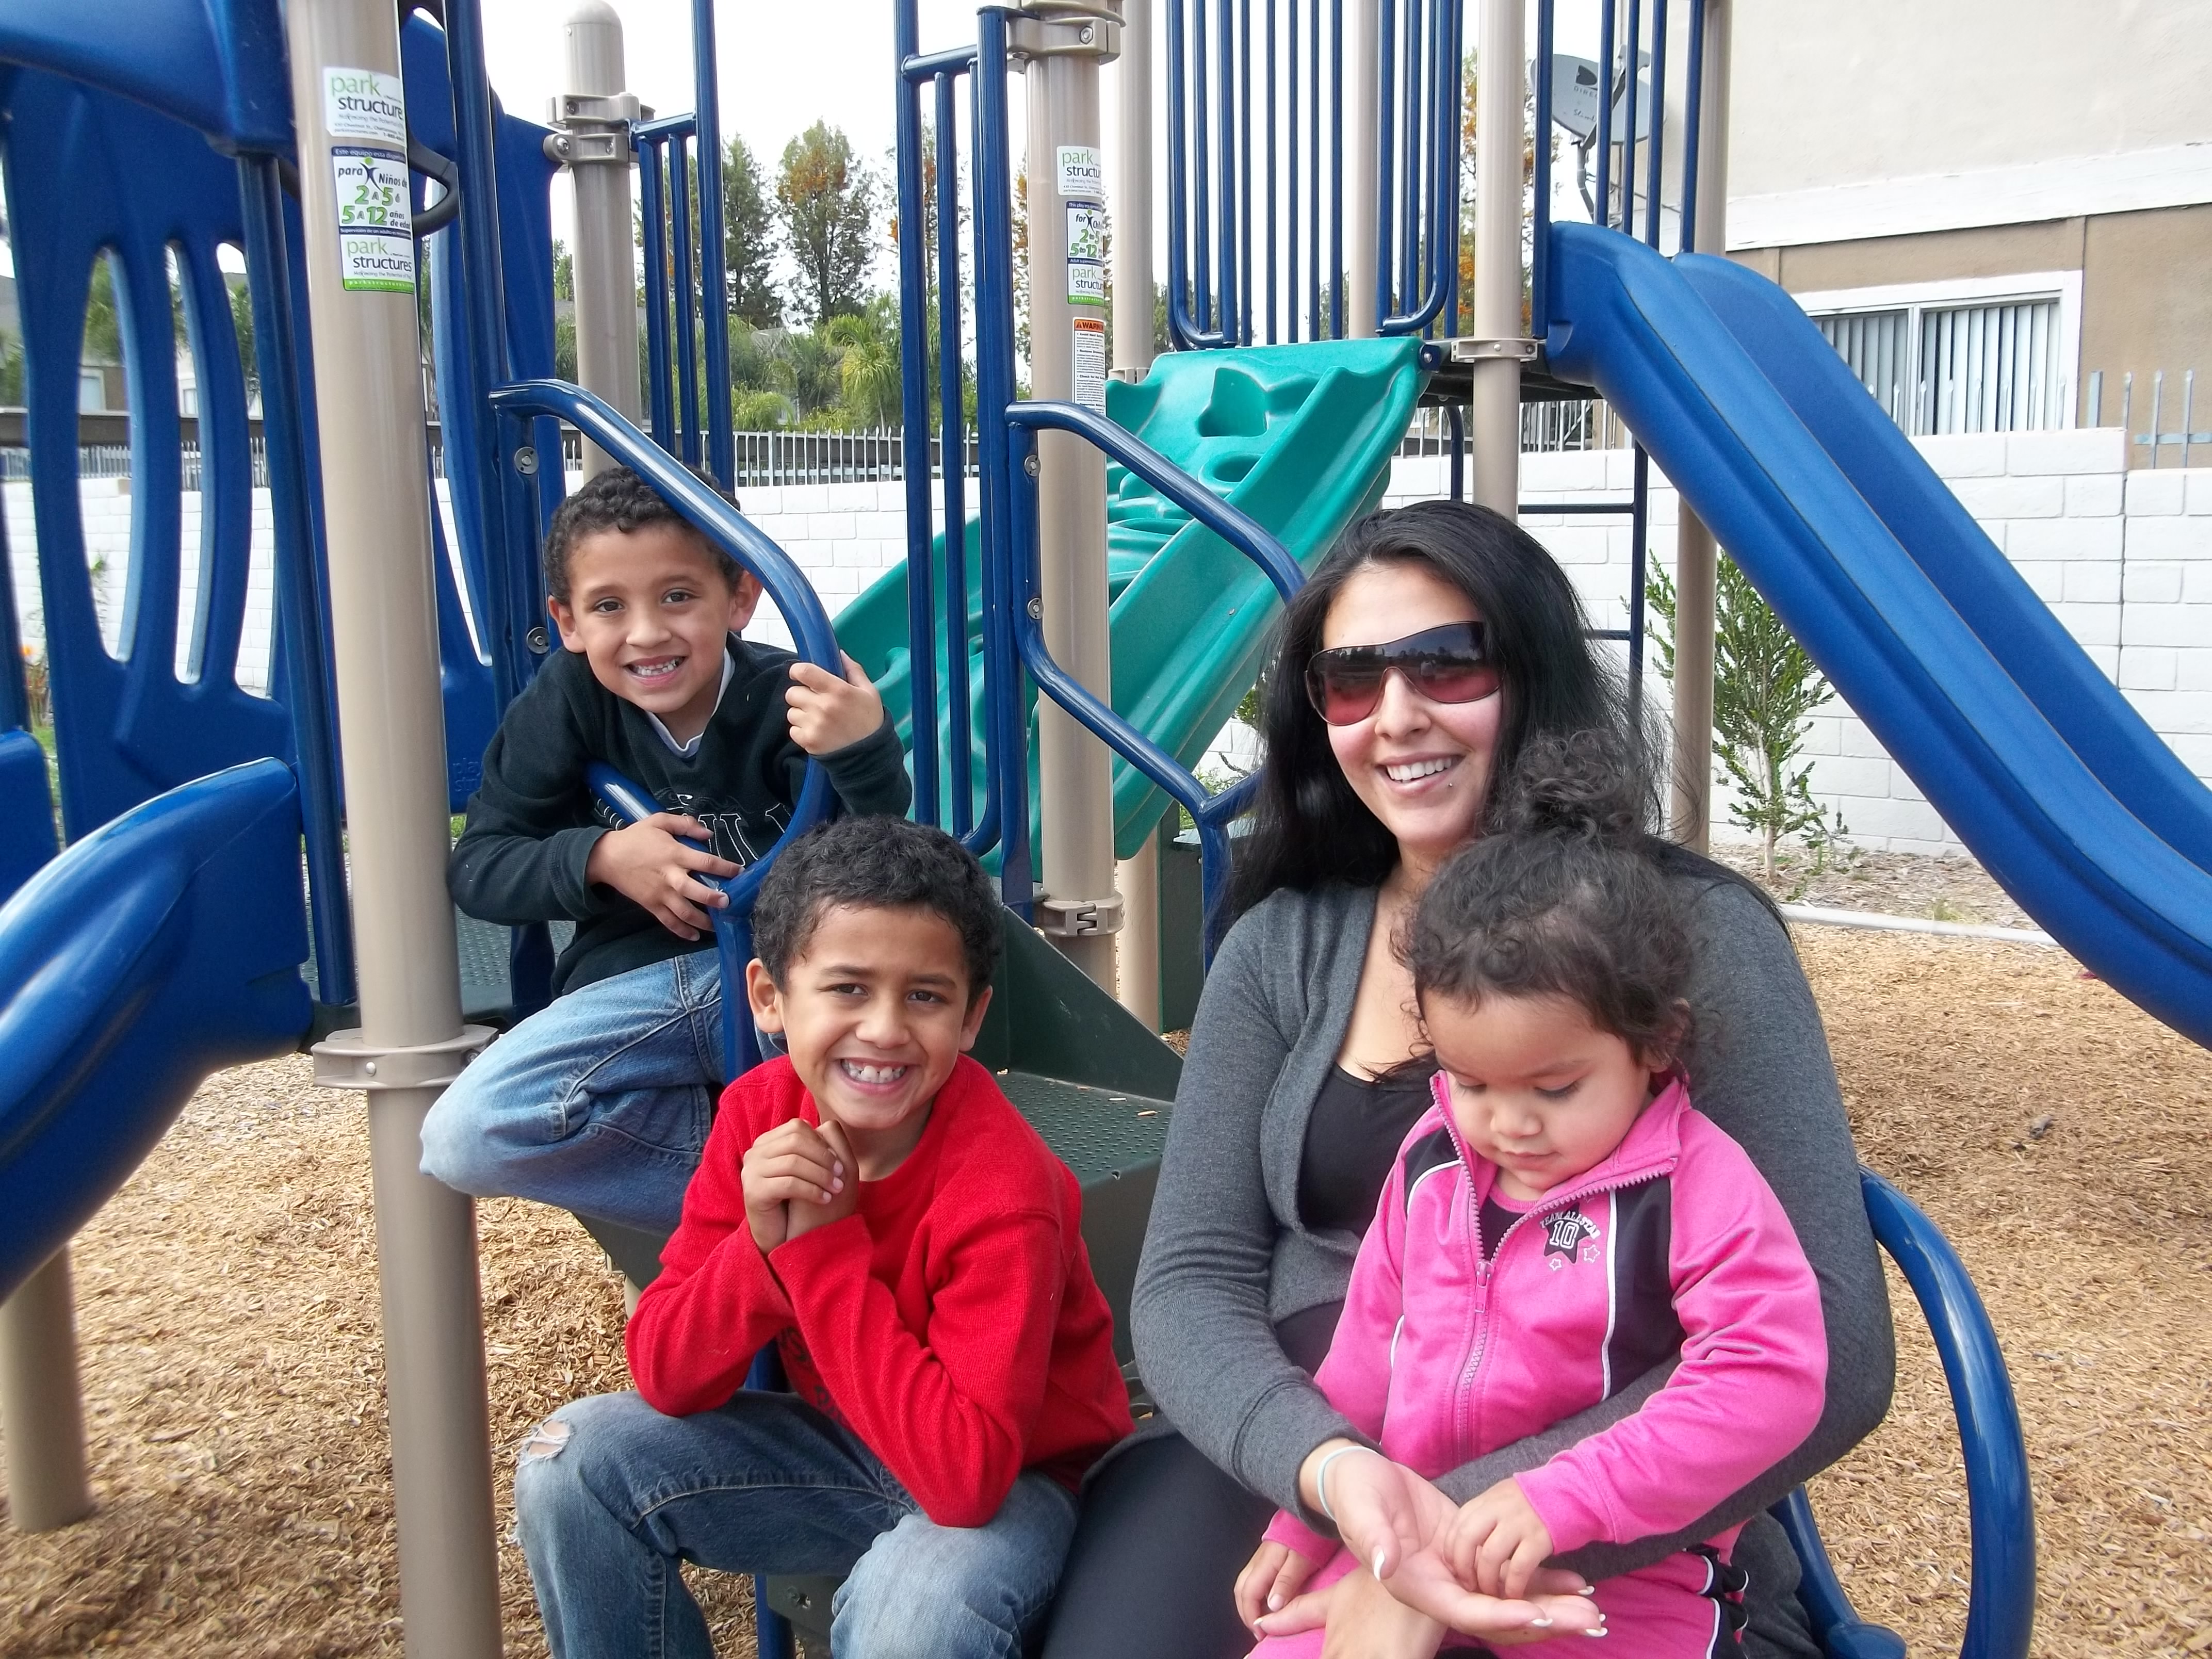 "I truly love living here.  The kids playground and computer room are very nice."<br /><br />Reyna Esqueda<br />Lakeview II Apartments